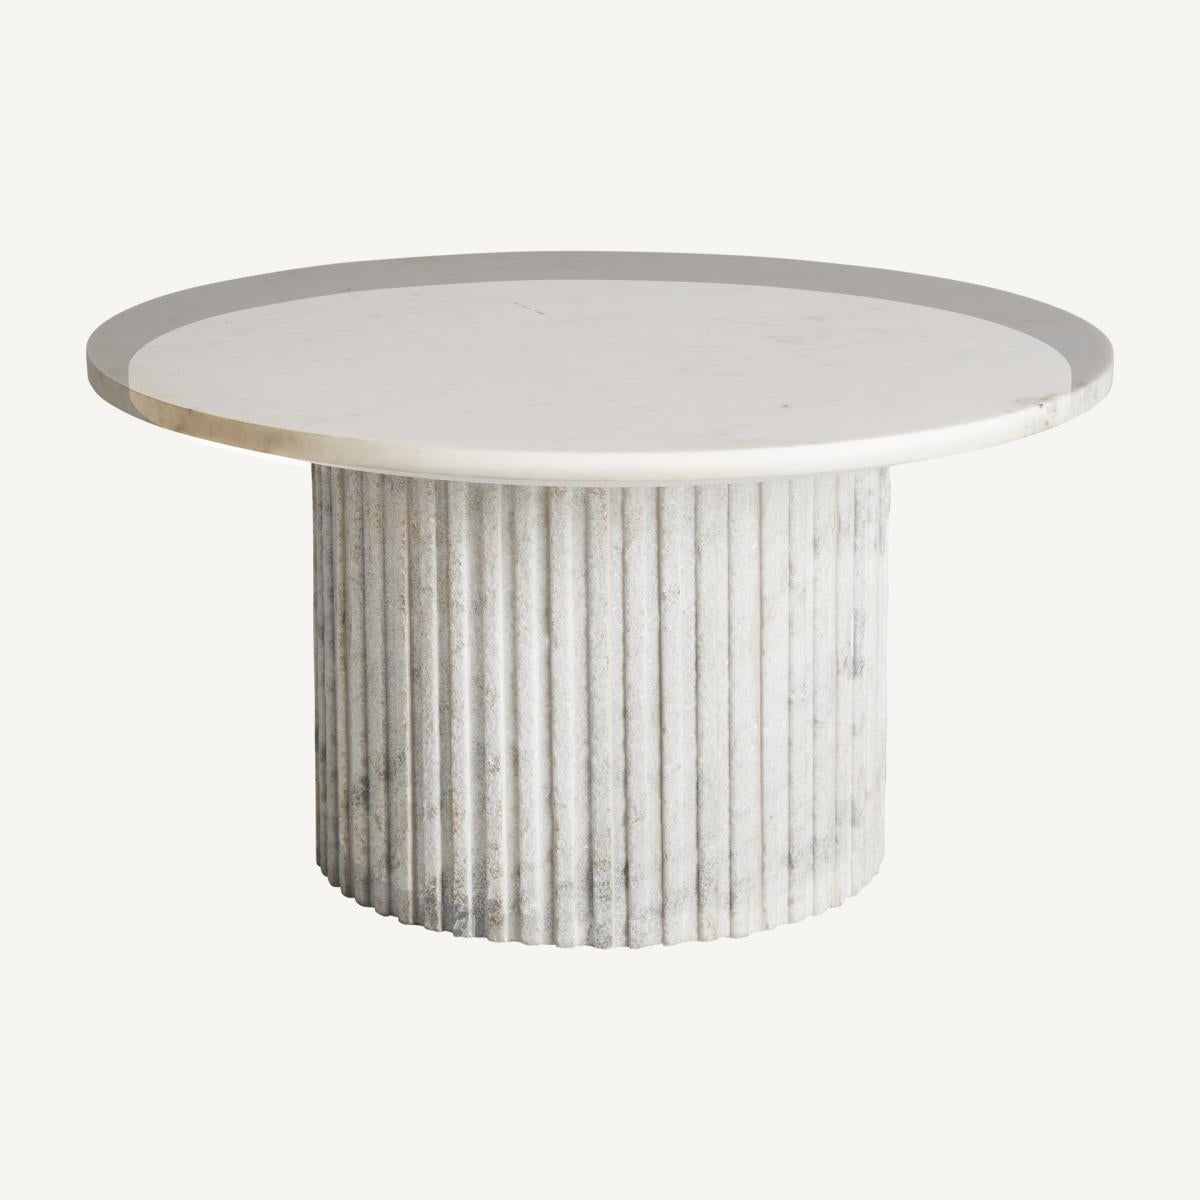 Spanish In-Stock, Art Deco Style Nesting Marble Tables For Sale